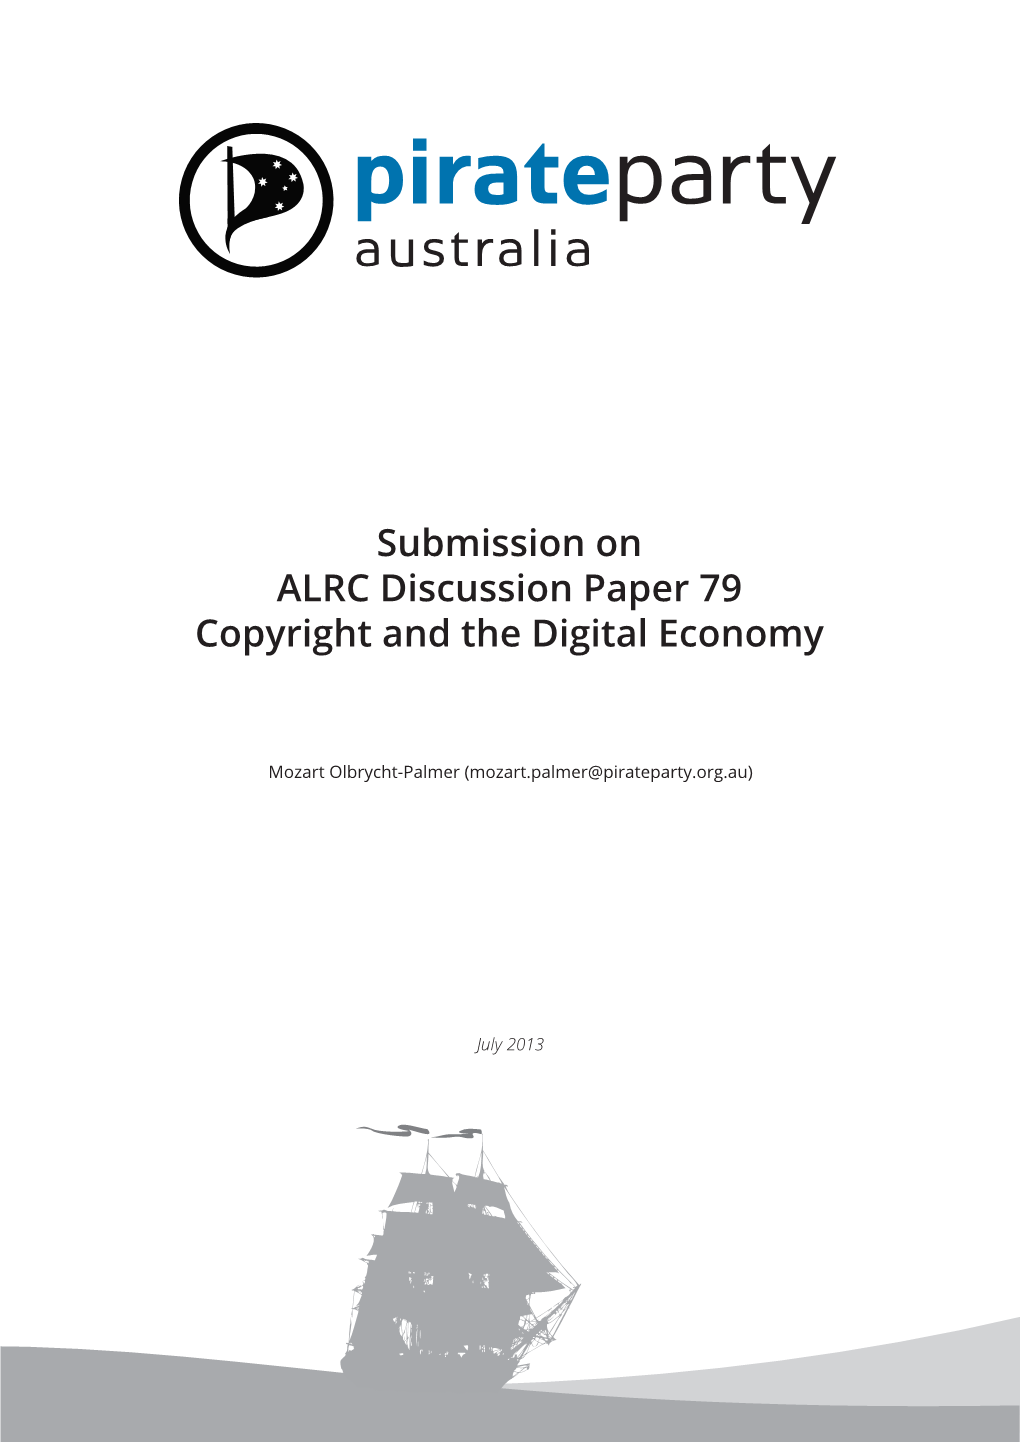 Submission on ALRC Discussion Paper 79 Copyright and the Digital Economy